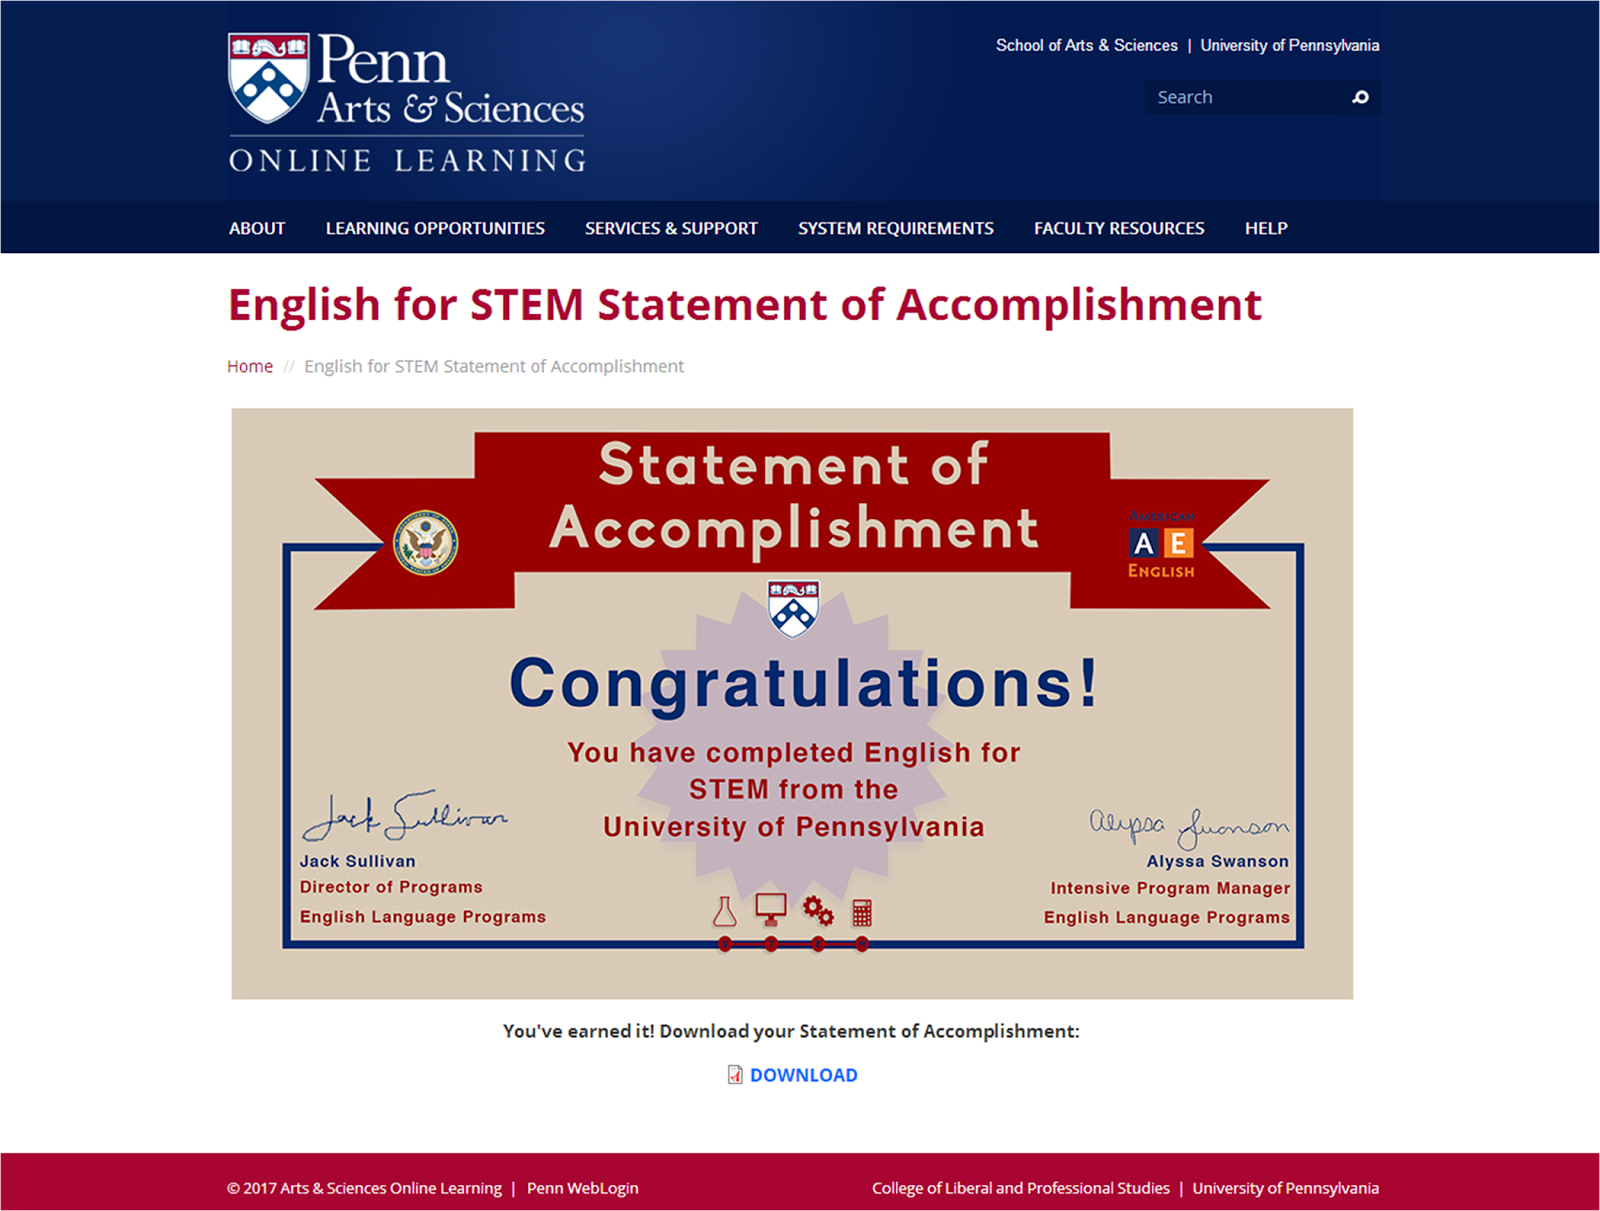 English for Science, Technology, Engineering, and Mathematics (STEM) Statement of Accomplishment